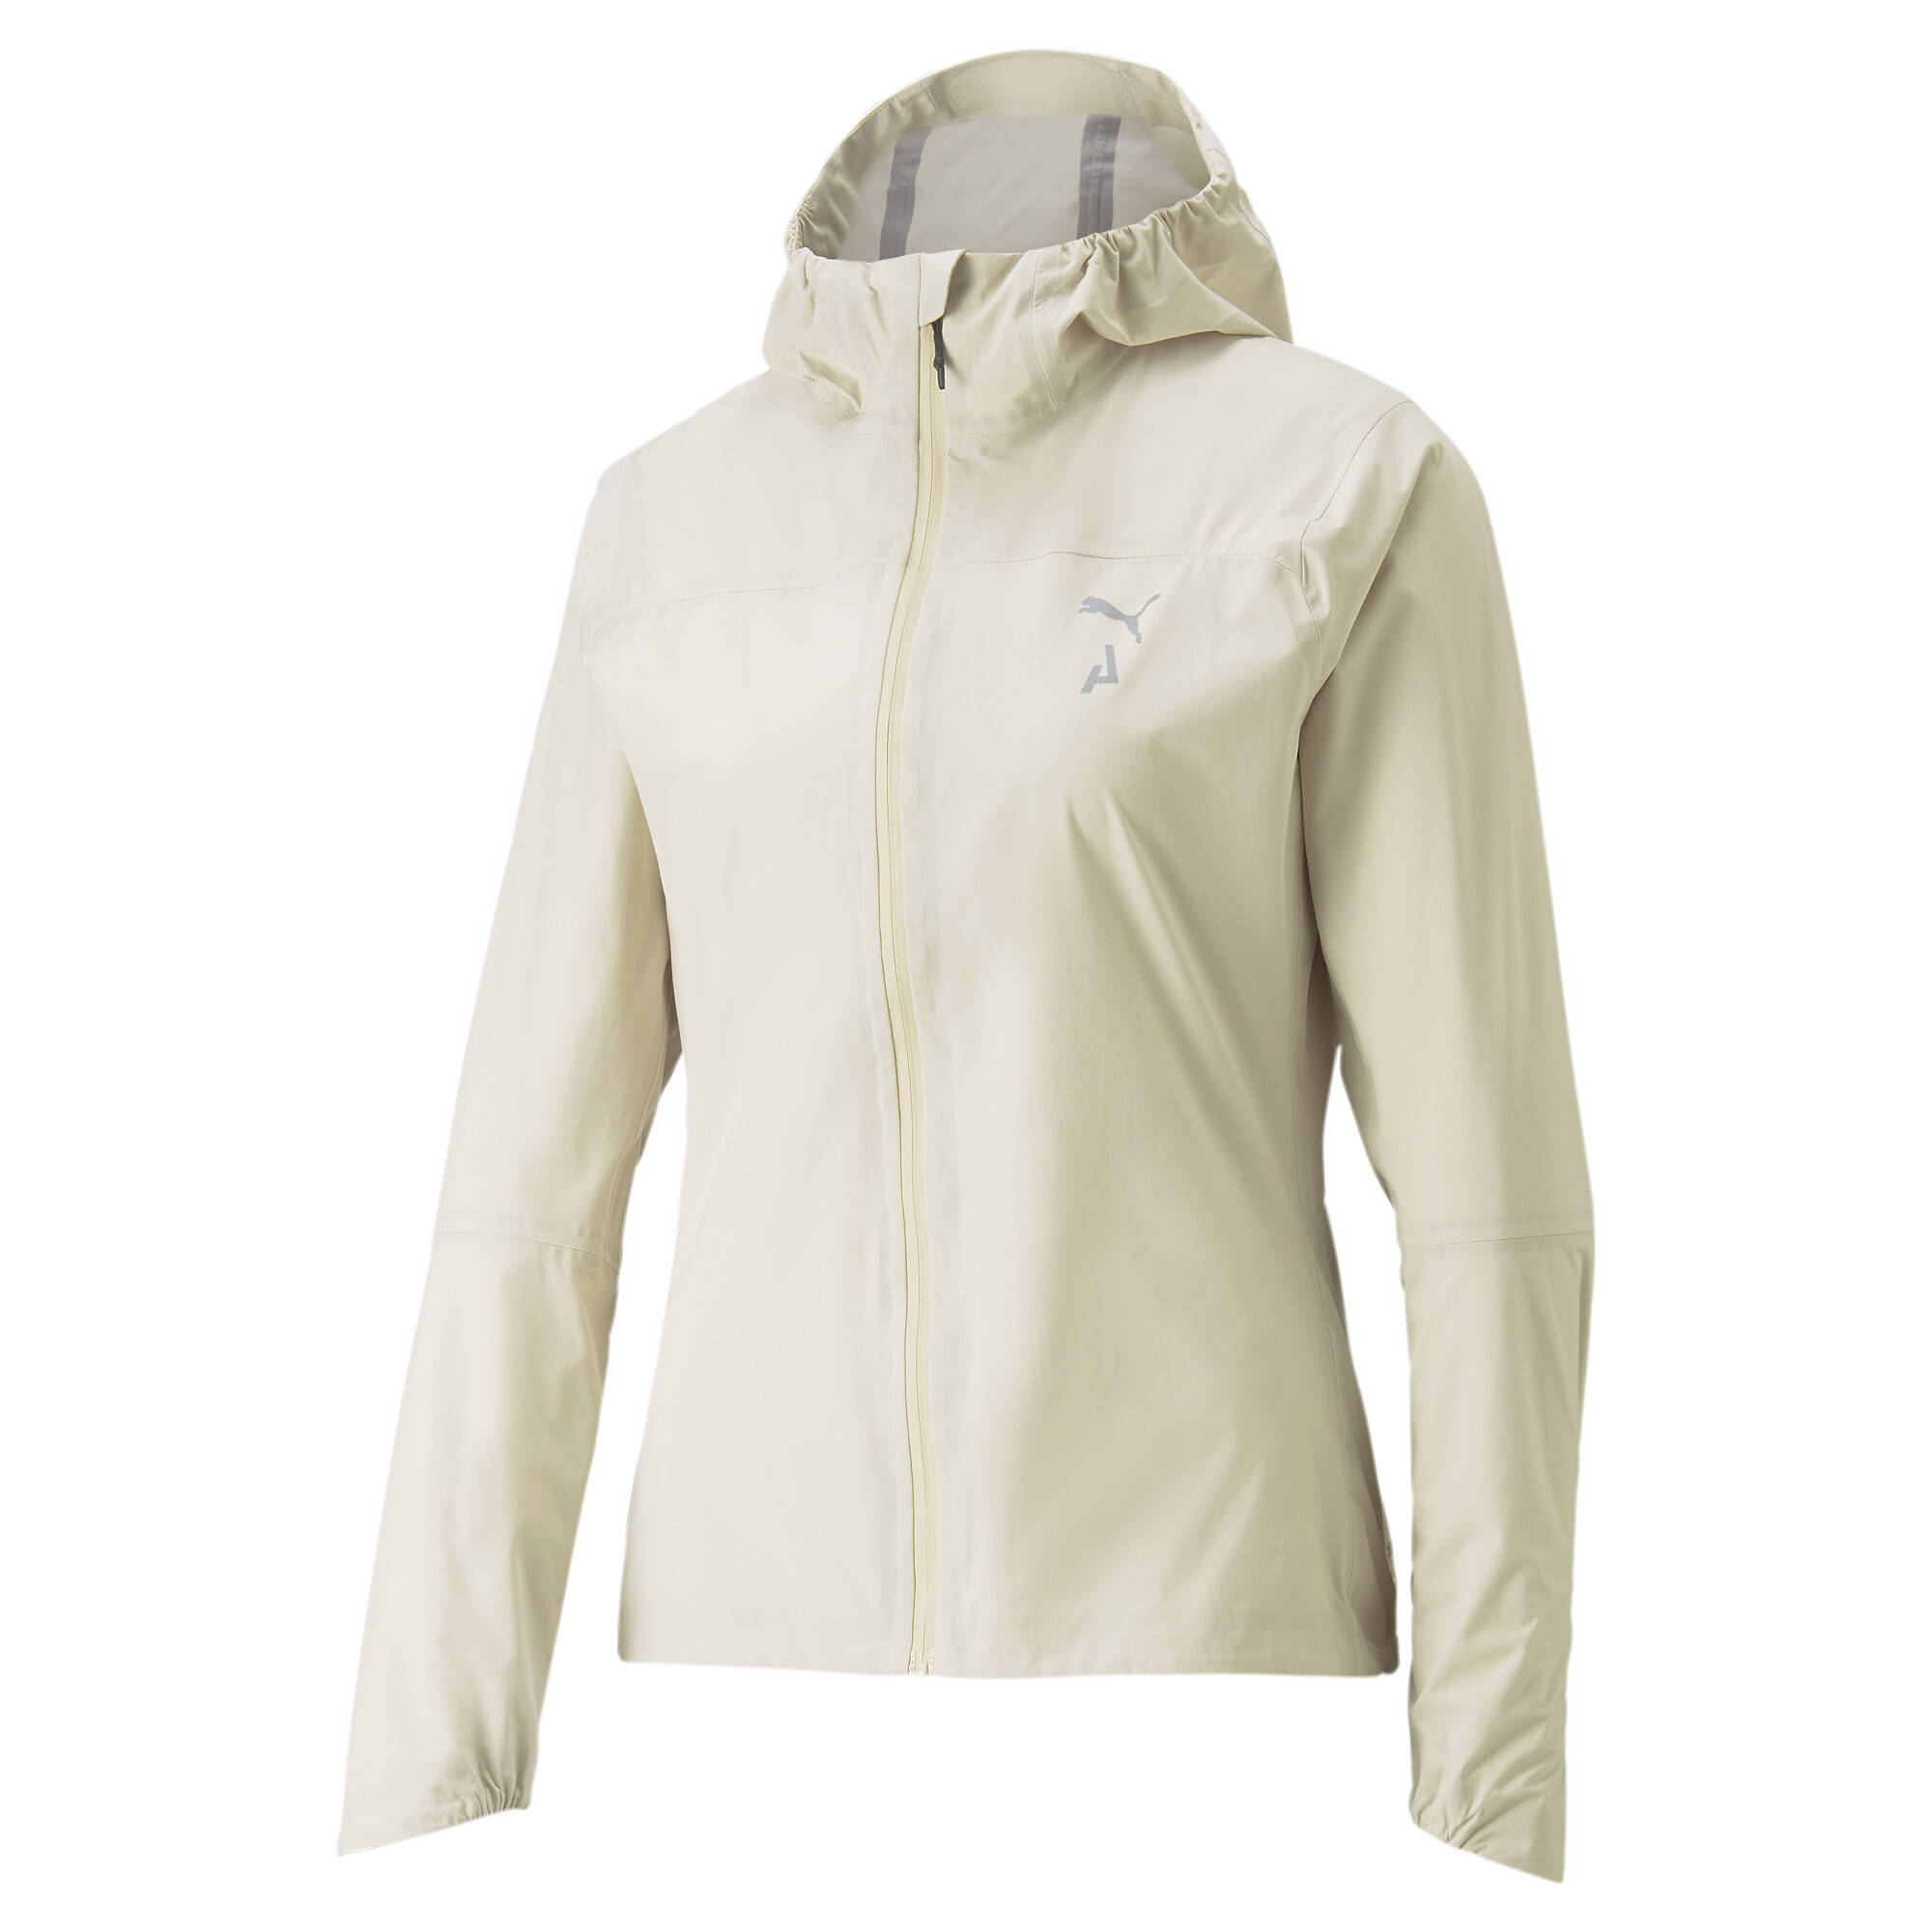 Women's Puma SEASONS Storm CELL Sympa TexÂ® Packable Trail Running Jacket, Beige, Size XL, Clothing